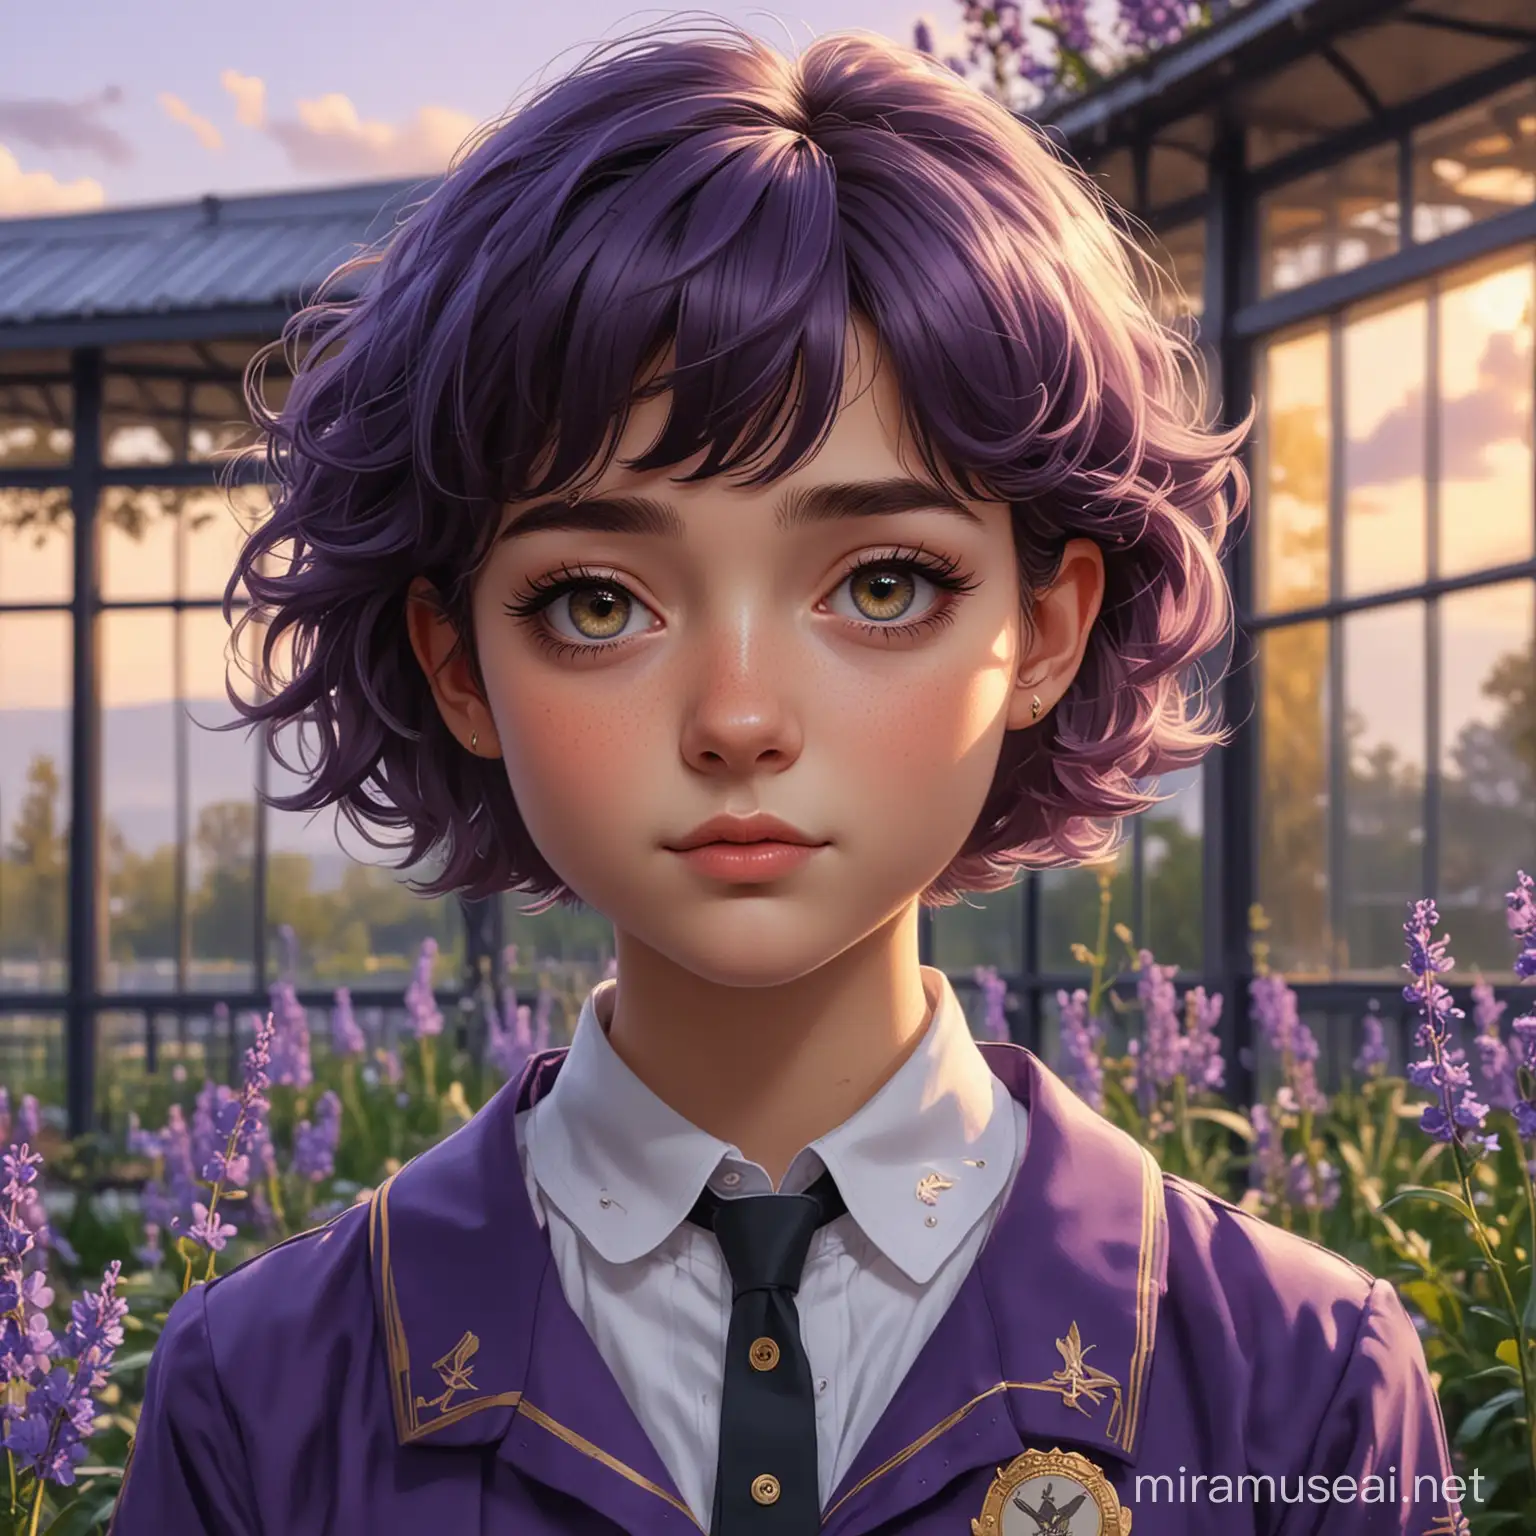 a girl, reader, wears a lavander school uniform, have gold badge in uniform, short hair, wavy hair, dark violet hair, shy personality, expressive eyes,  glass pavillion as background, flowers and crows, dawn view